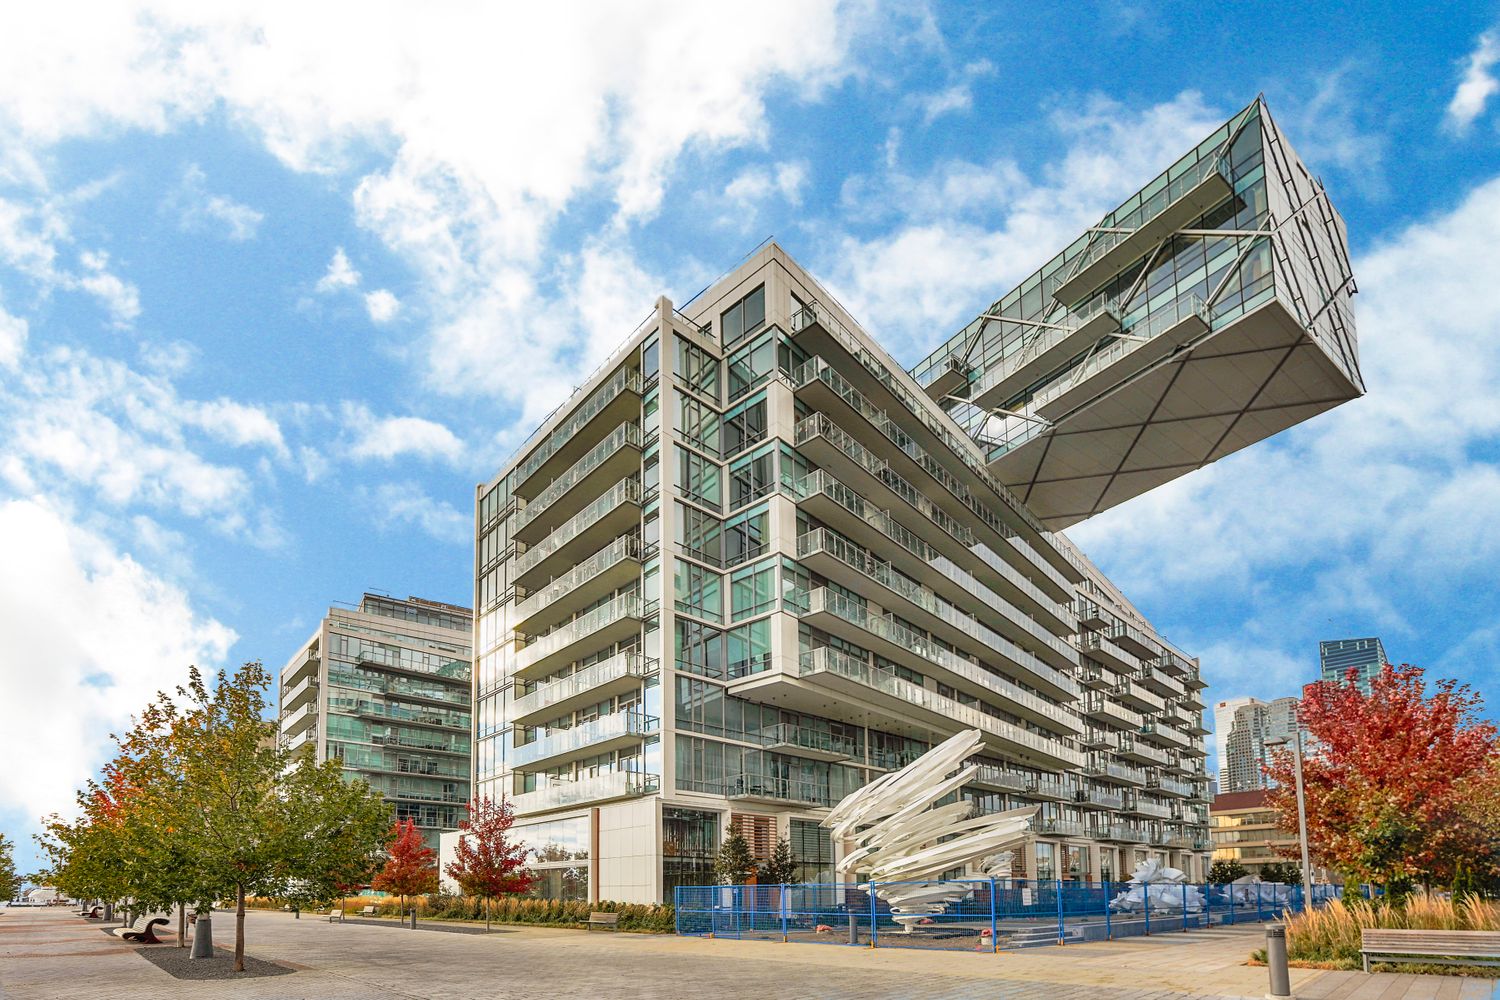 29 Queens Quay E. Pier 27 Phase II Condos is located in  Downtown, Toronto - image #2 of 5